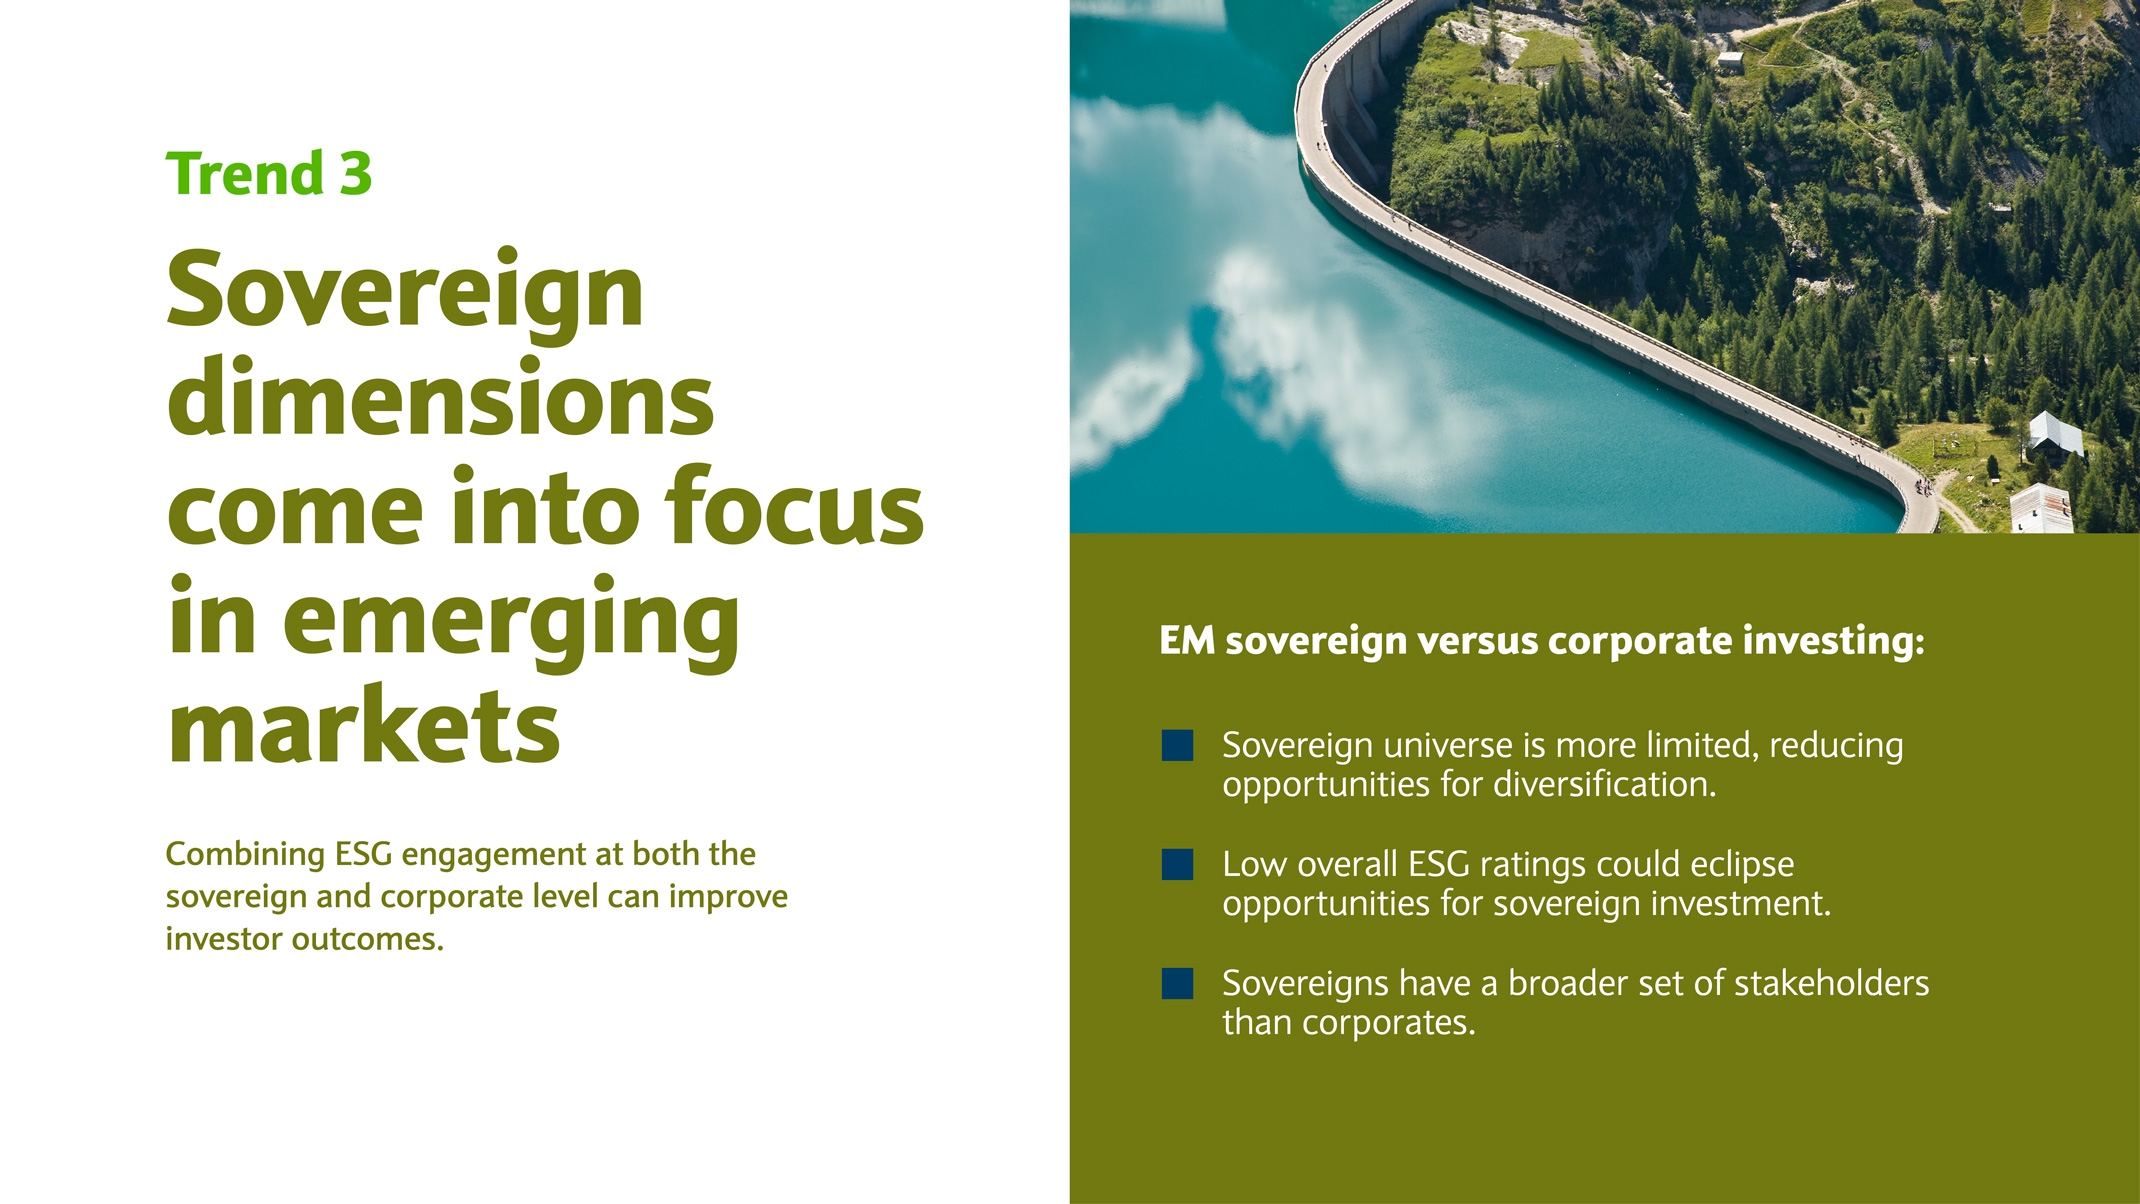 Sovereign dimensions come into focus in emerging markets